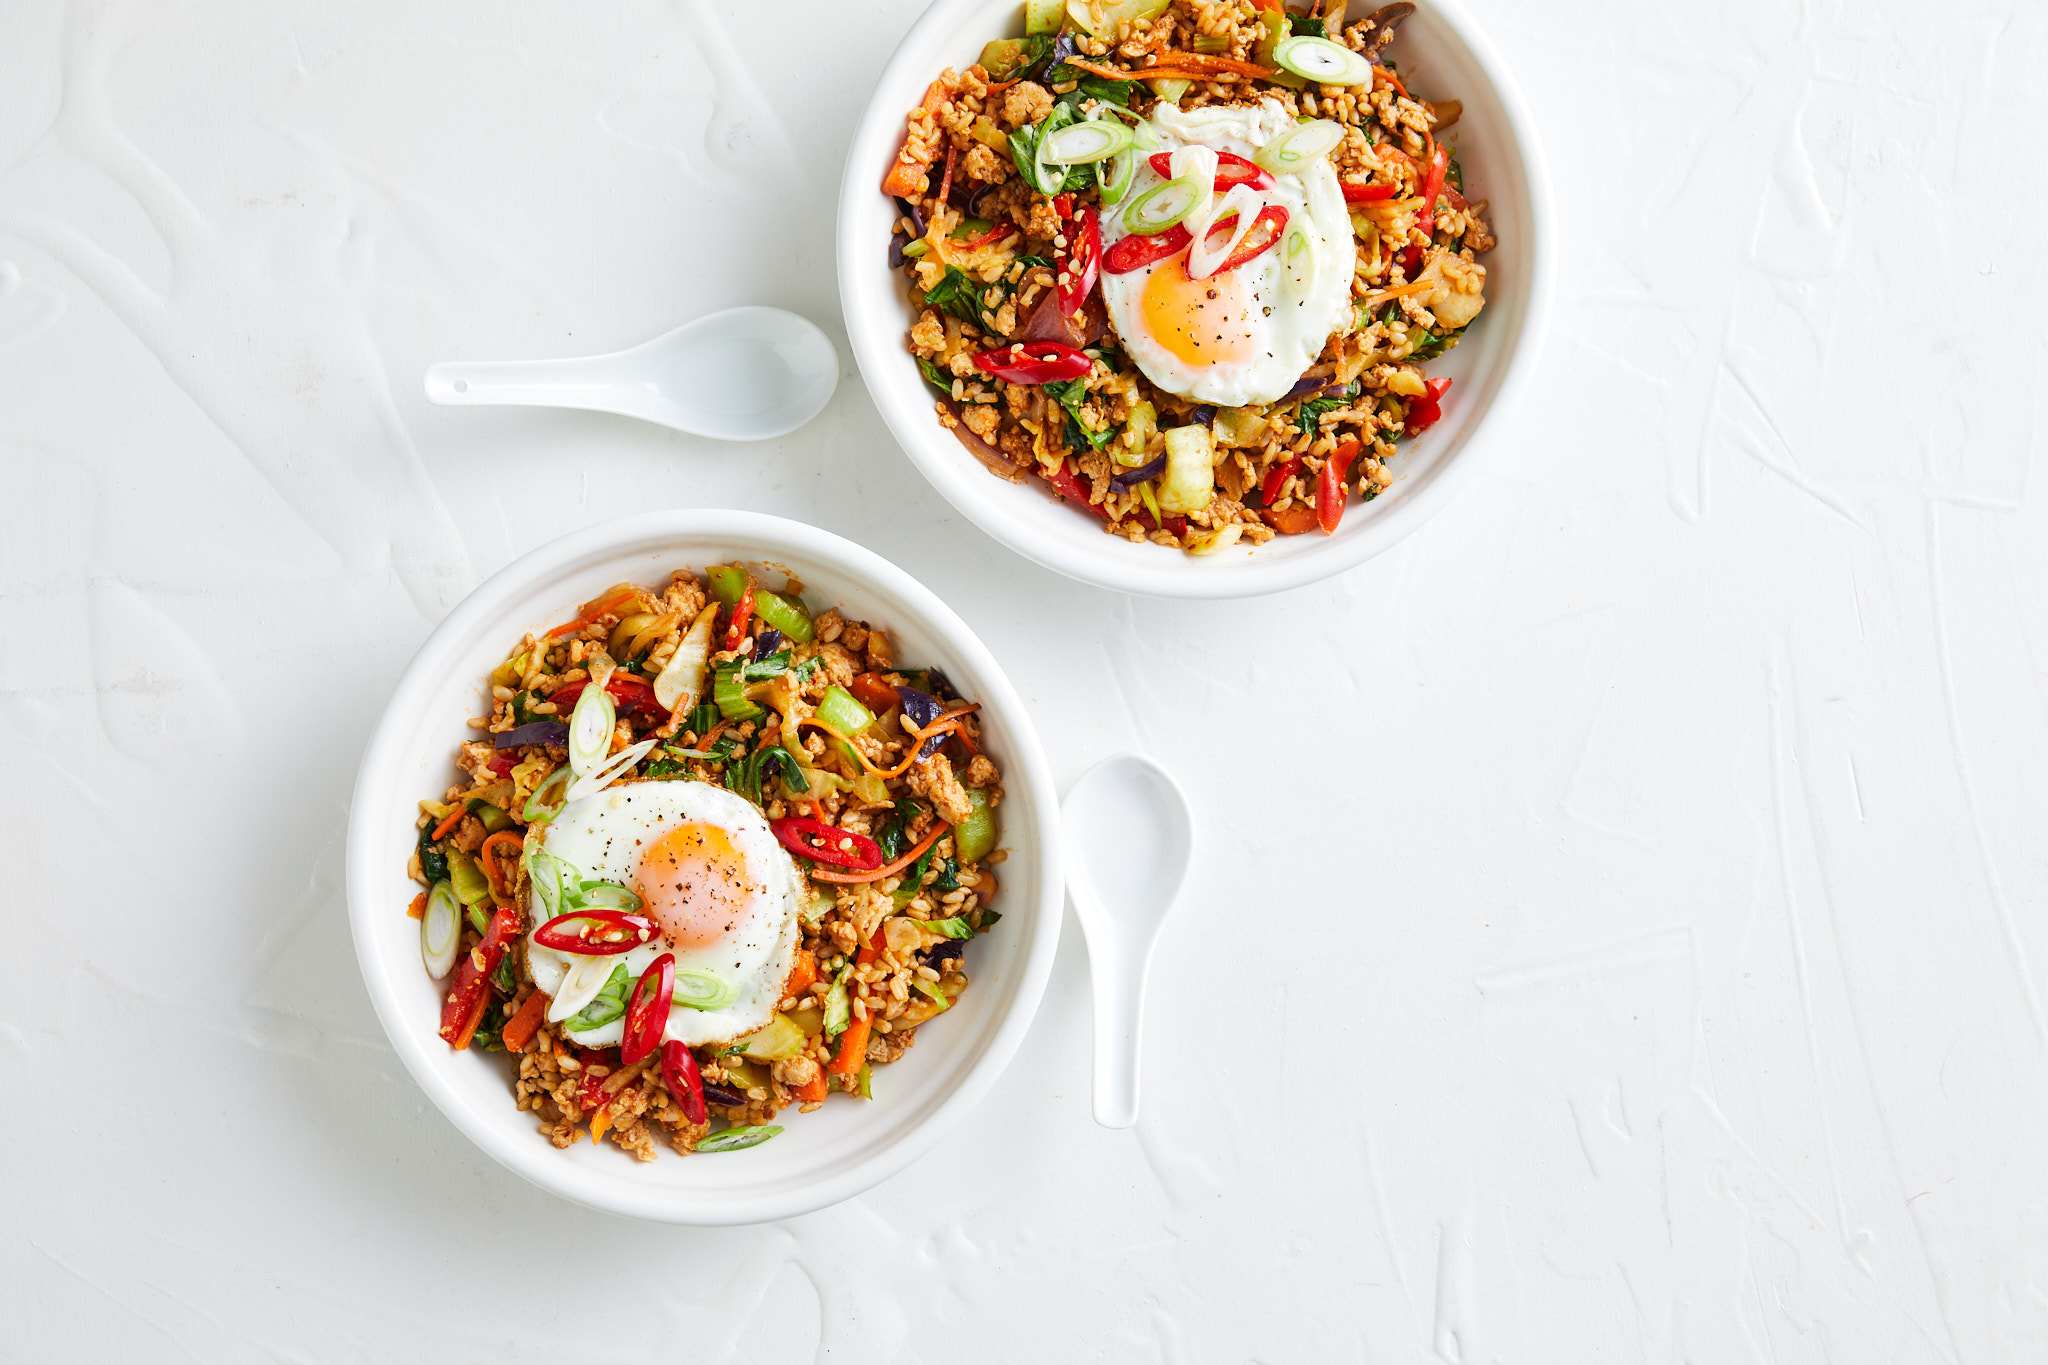 Two bowls of food topped with an egg, rice and vegetables